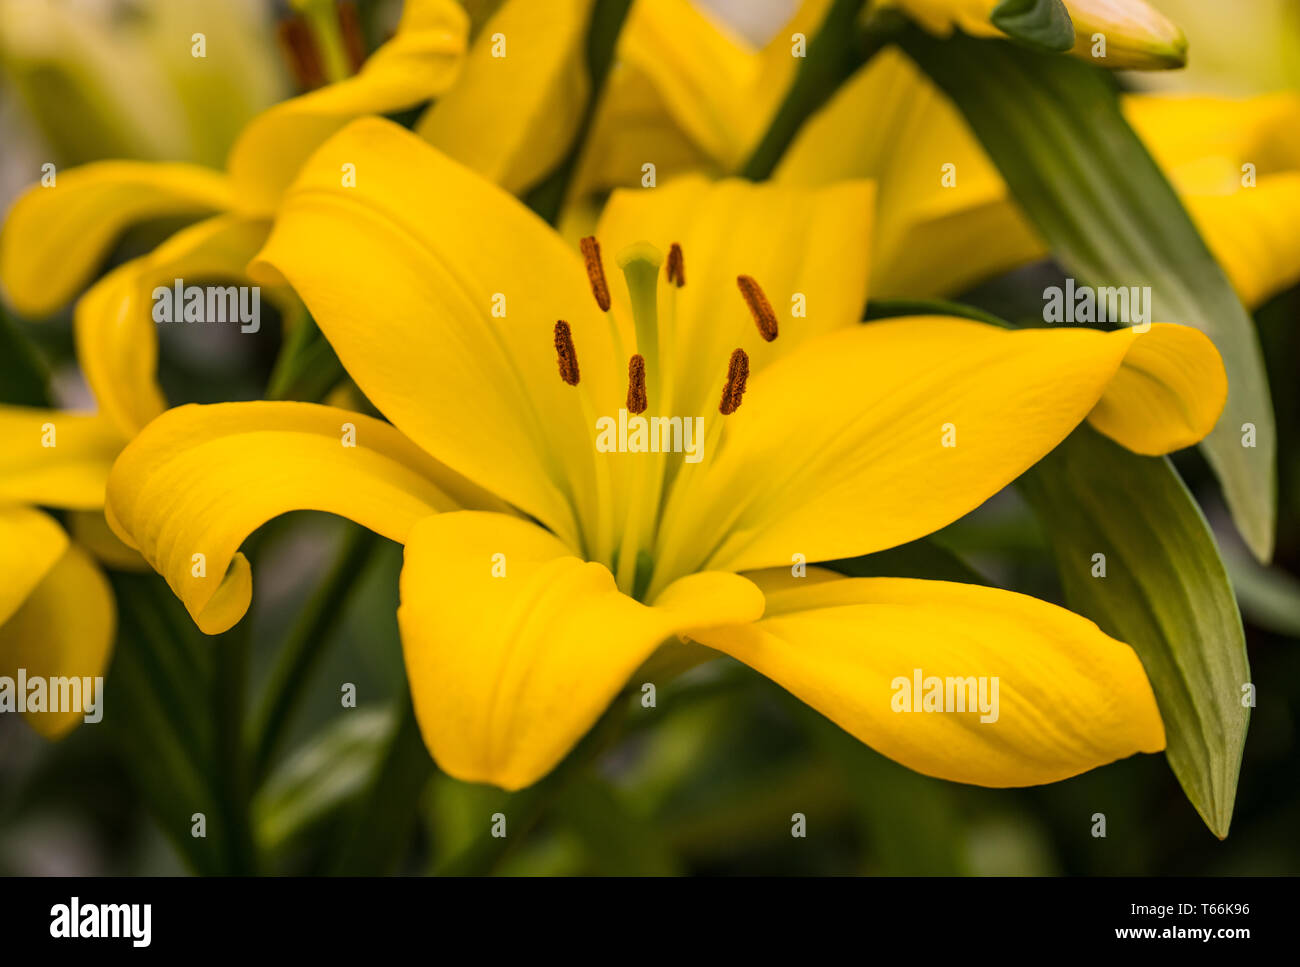 Yellow lily flower in garden Stock Photo